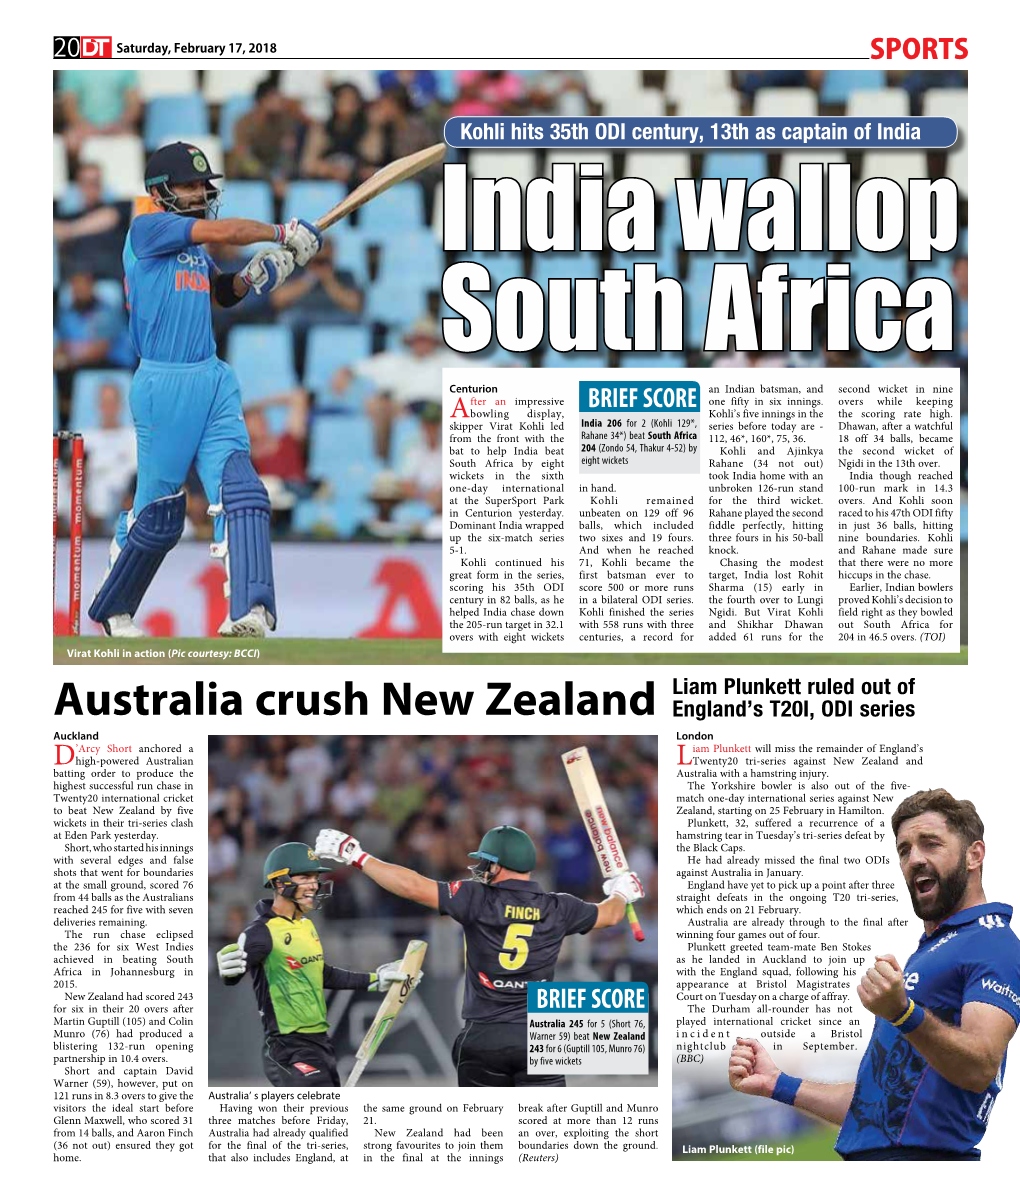 Australia Crush New Zealand England’S T20I, ODI Series Krueger Won Silver and Denis Musgrave and Young Are for His Preferred 15Km Event, Said Musgrave